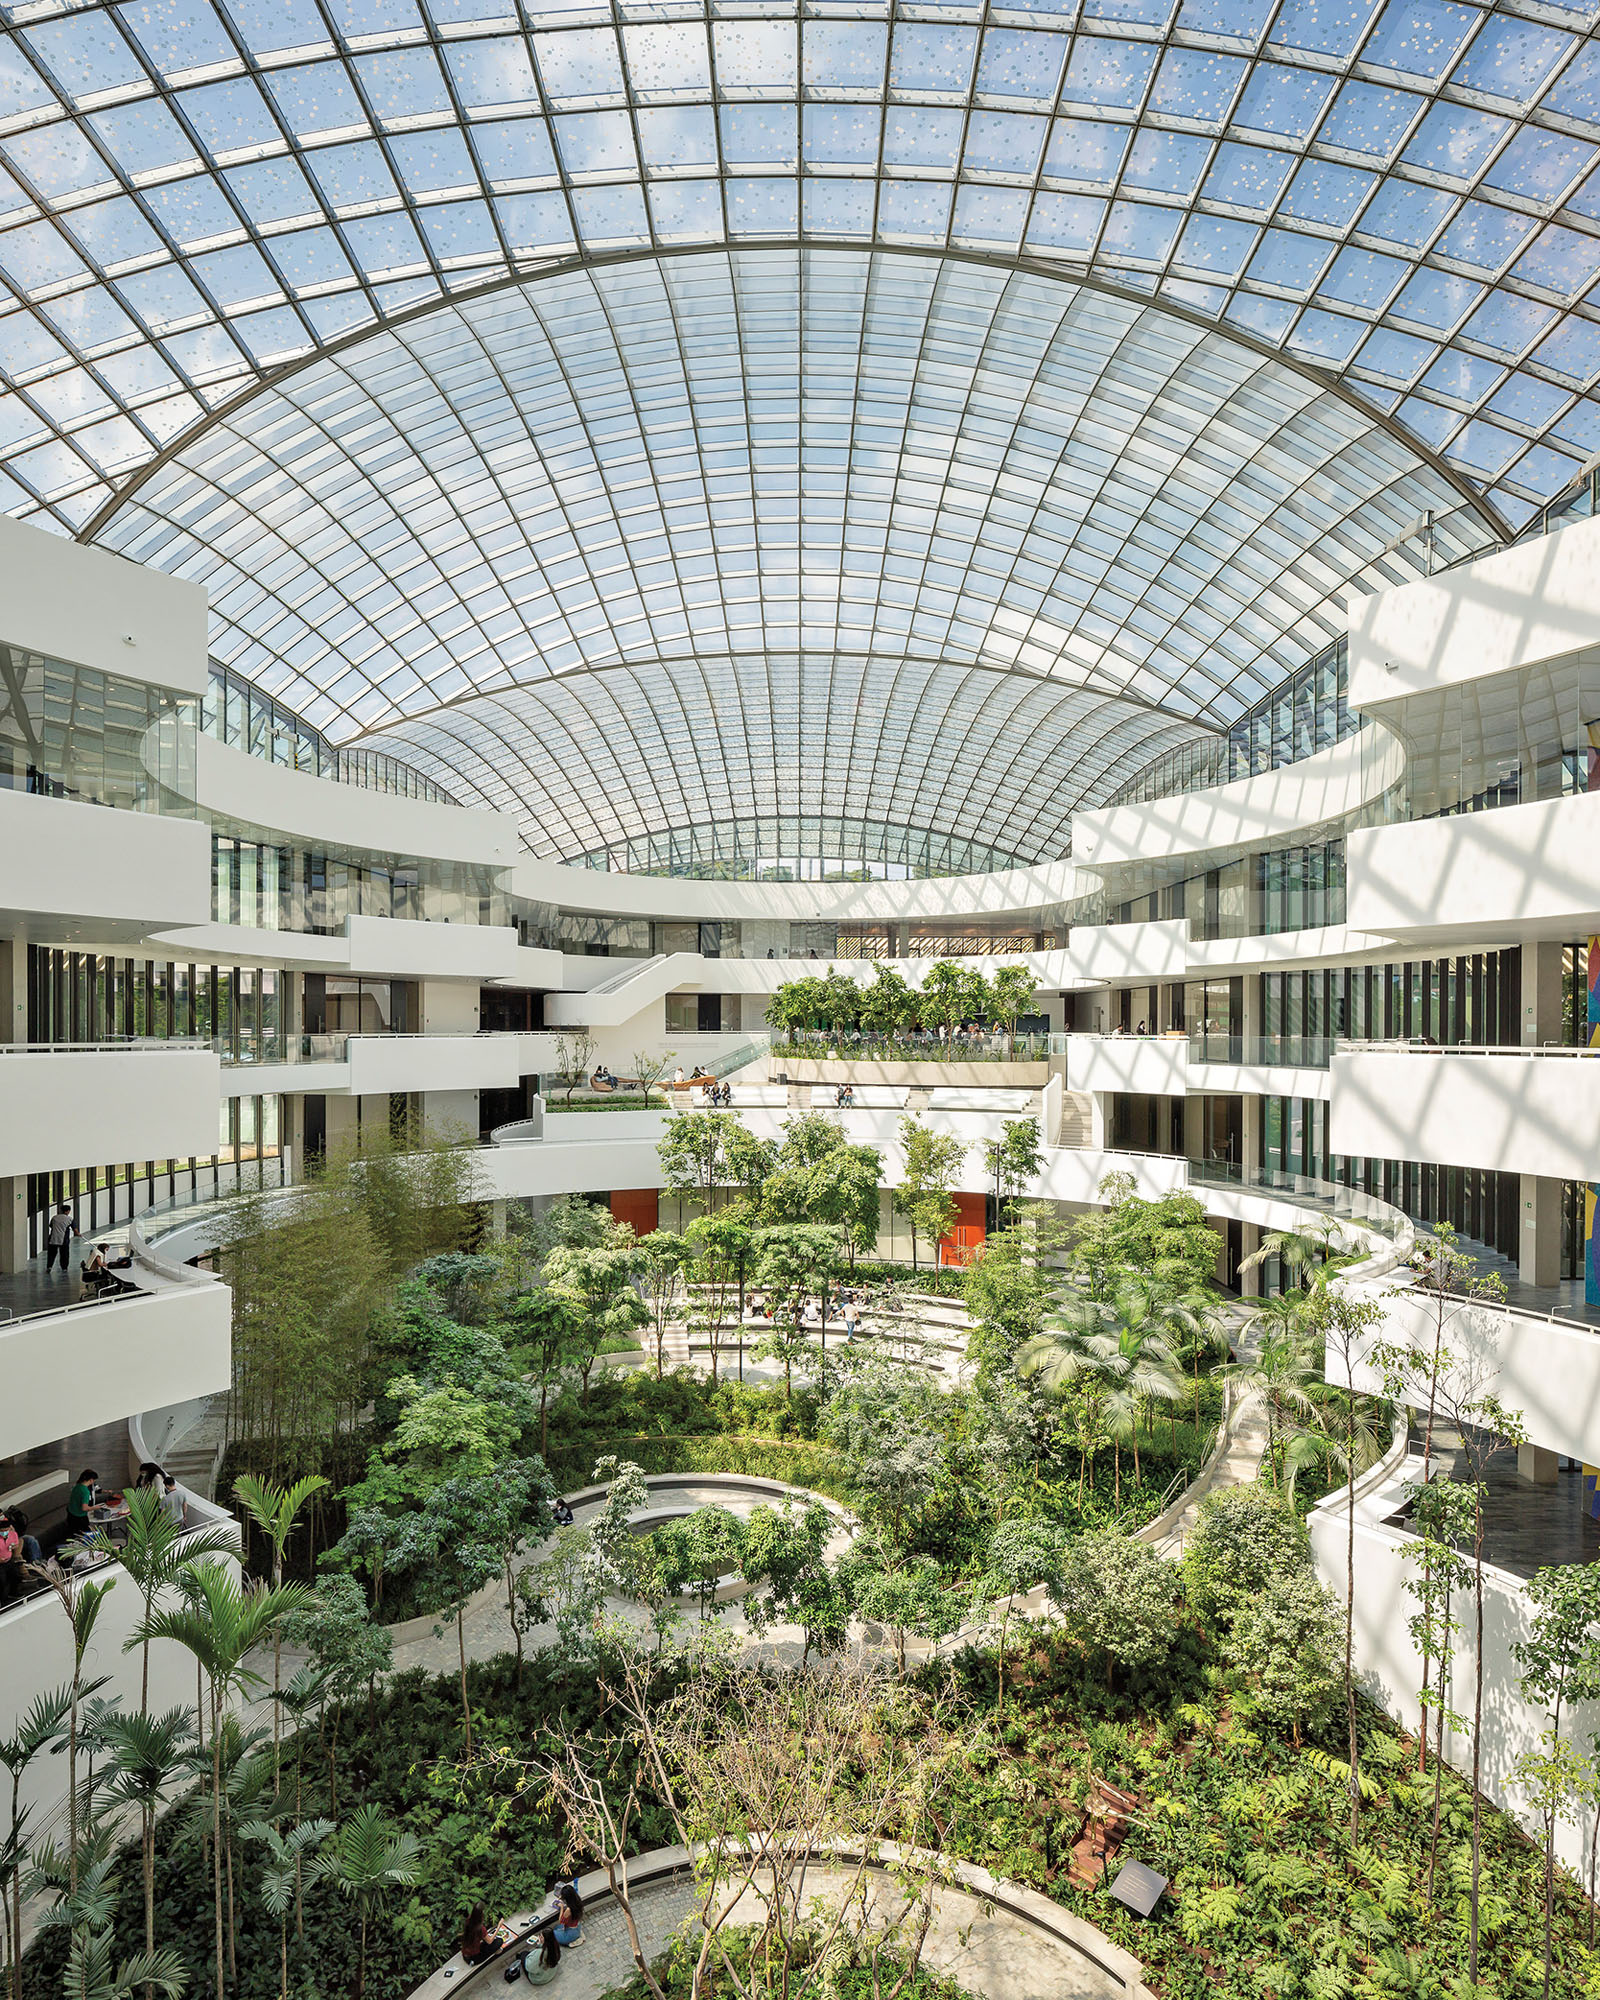 A photograph of an atrium with a massive skylight and abundant plantings on the ground level